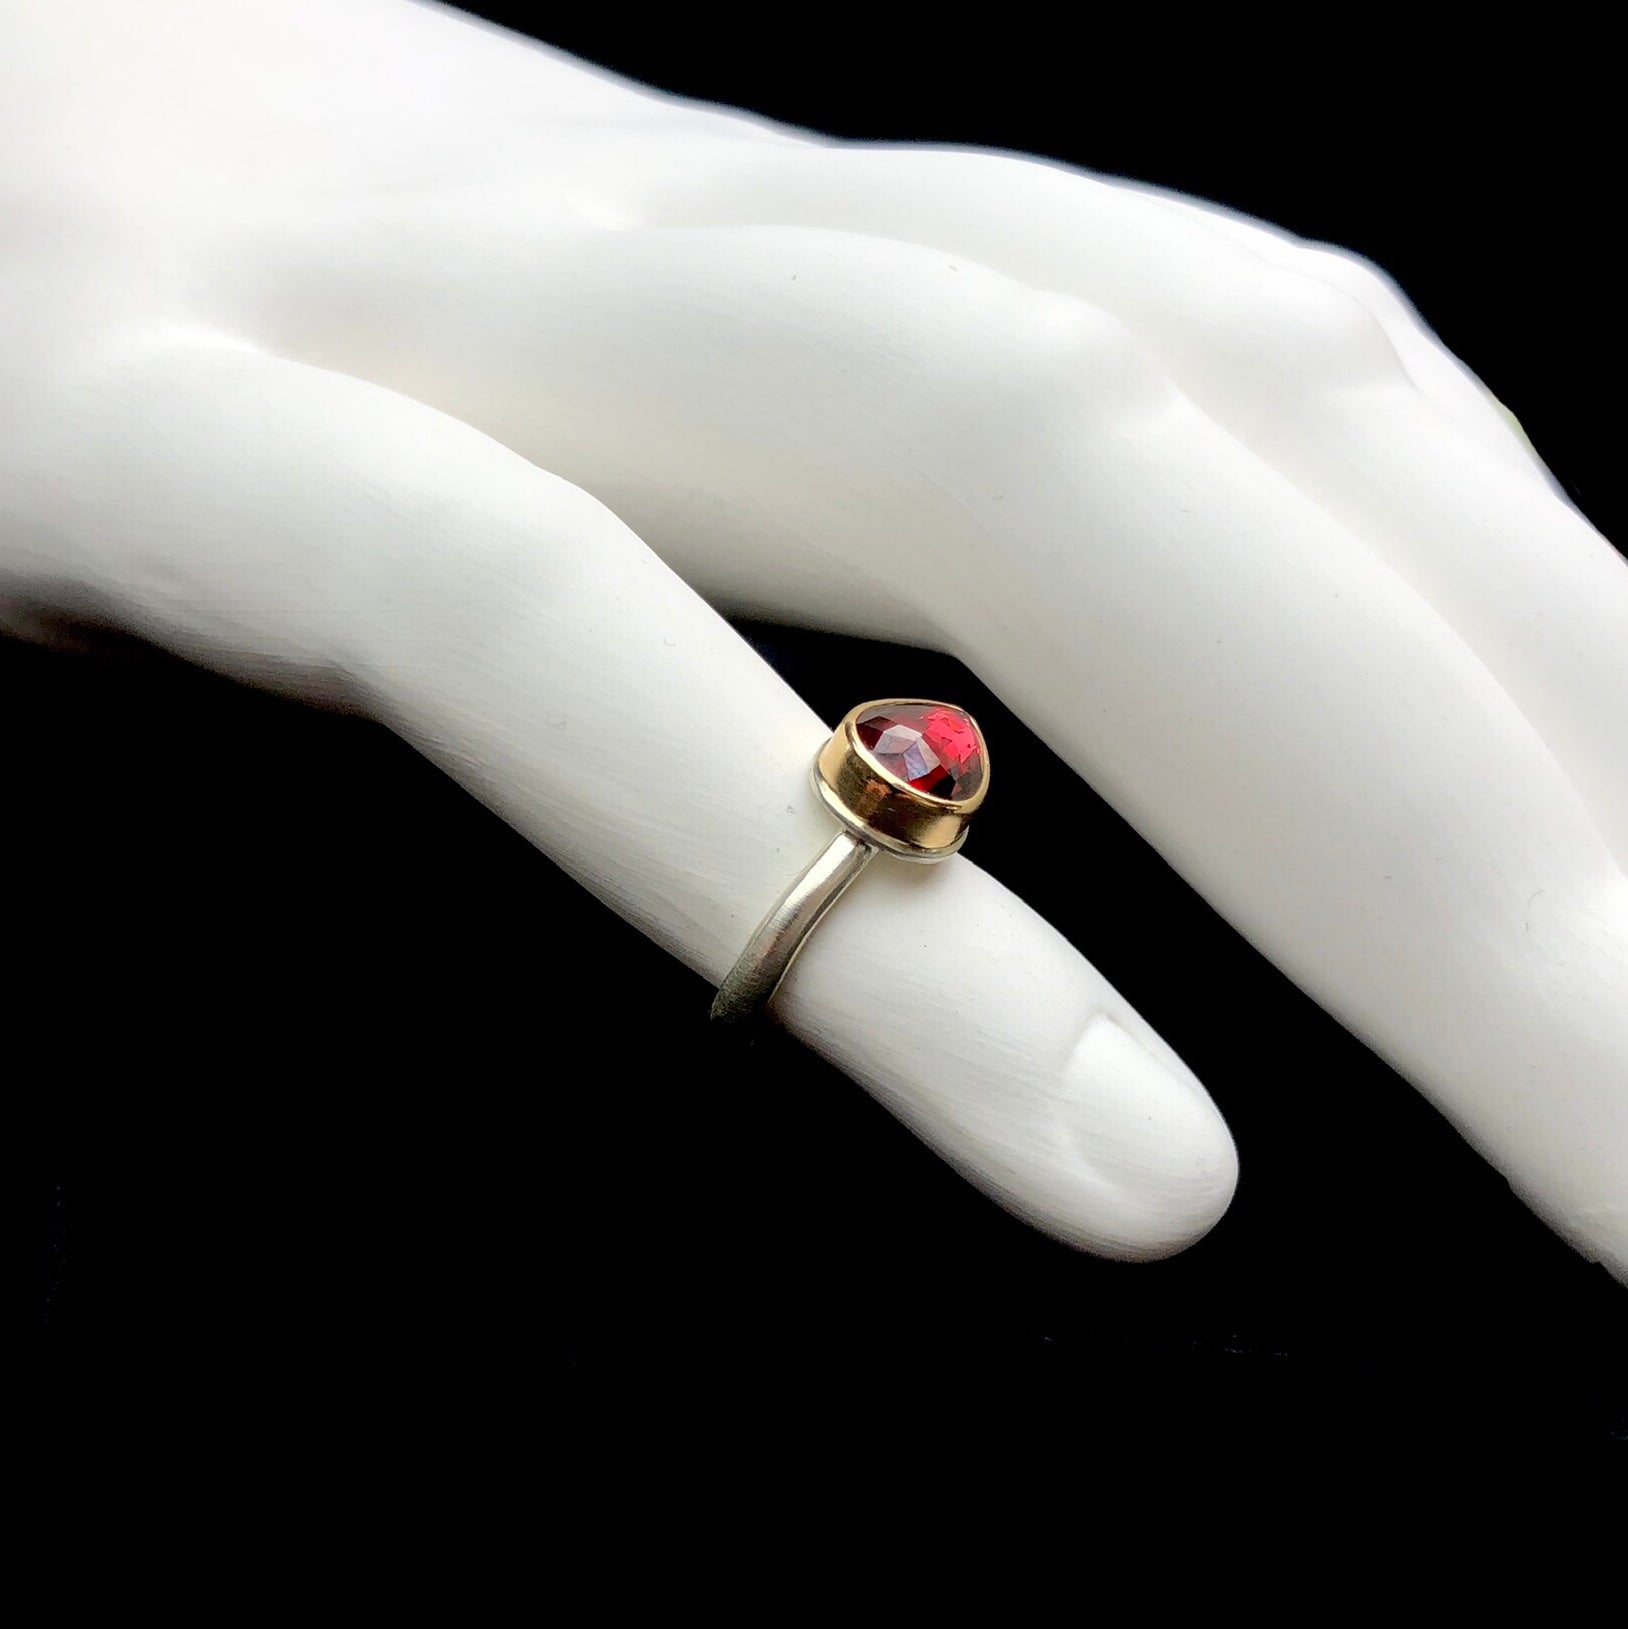 Side view of red colored garnet stone ring with gold setting and silver band shown on white ceramic finger